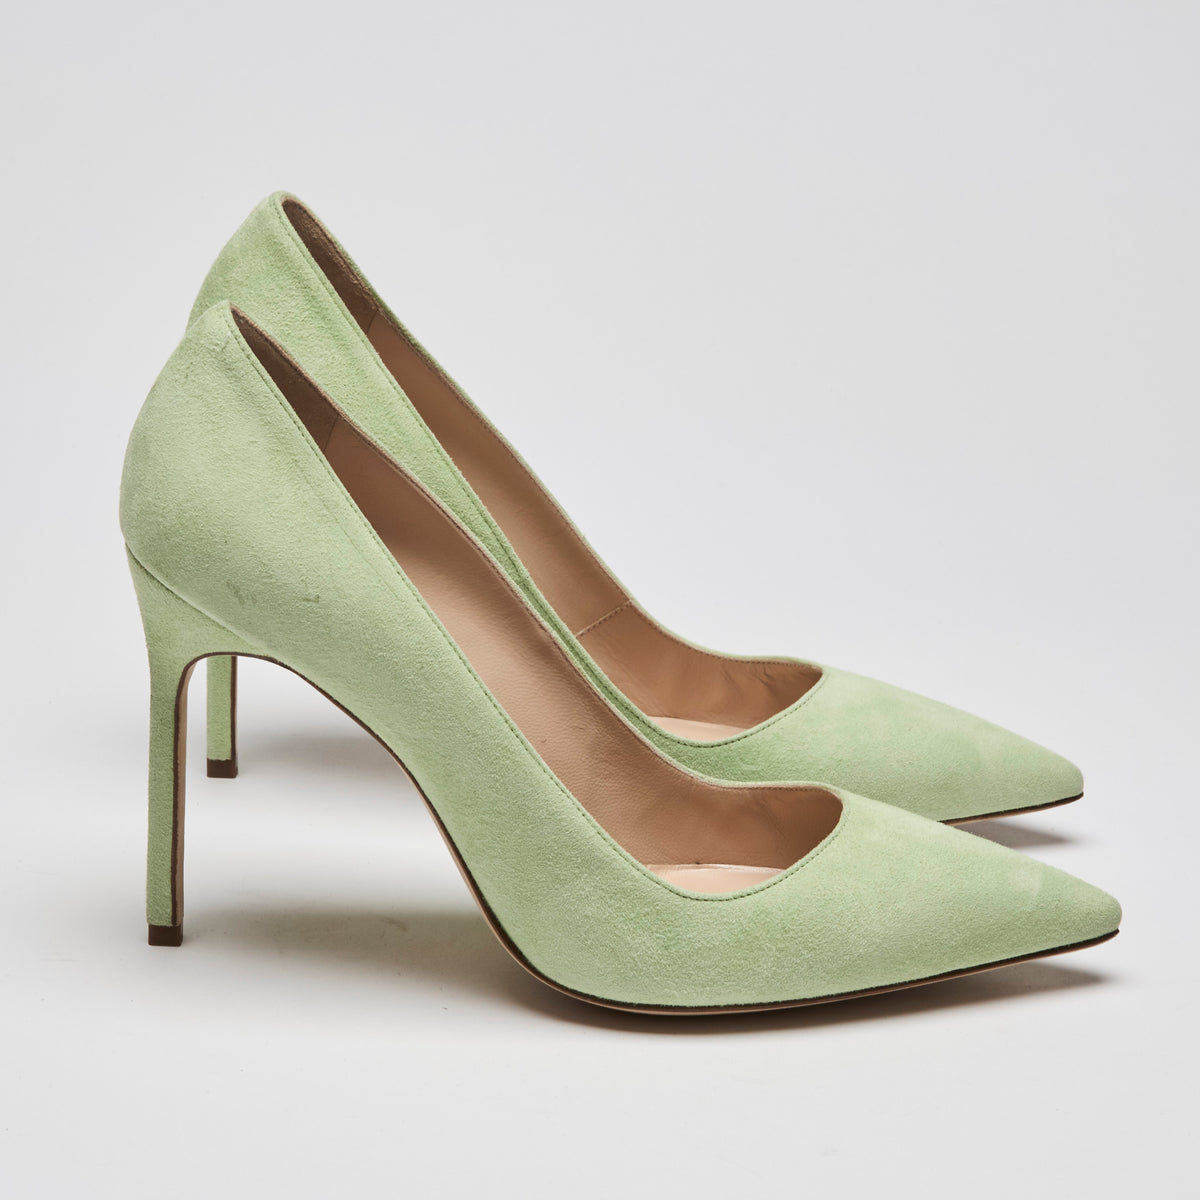 Manolo Blahnik BB Light Green Suede Pointed Toe Pumps Size 38